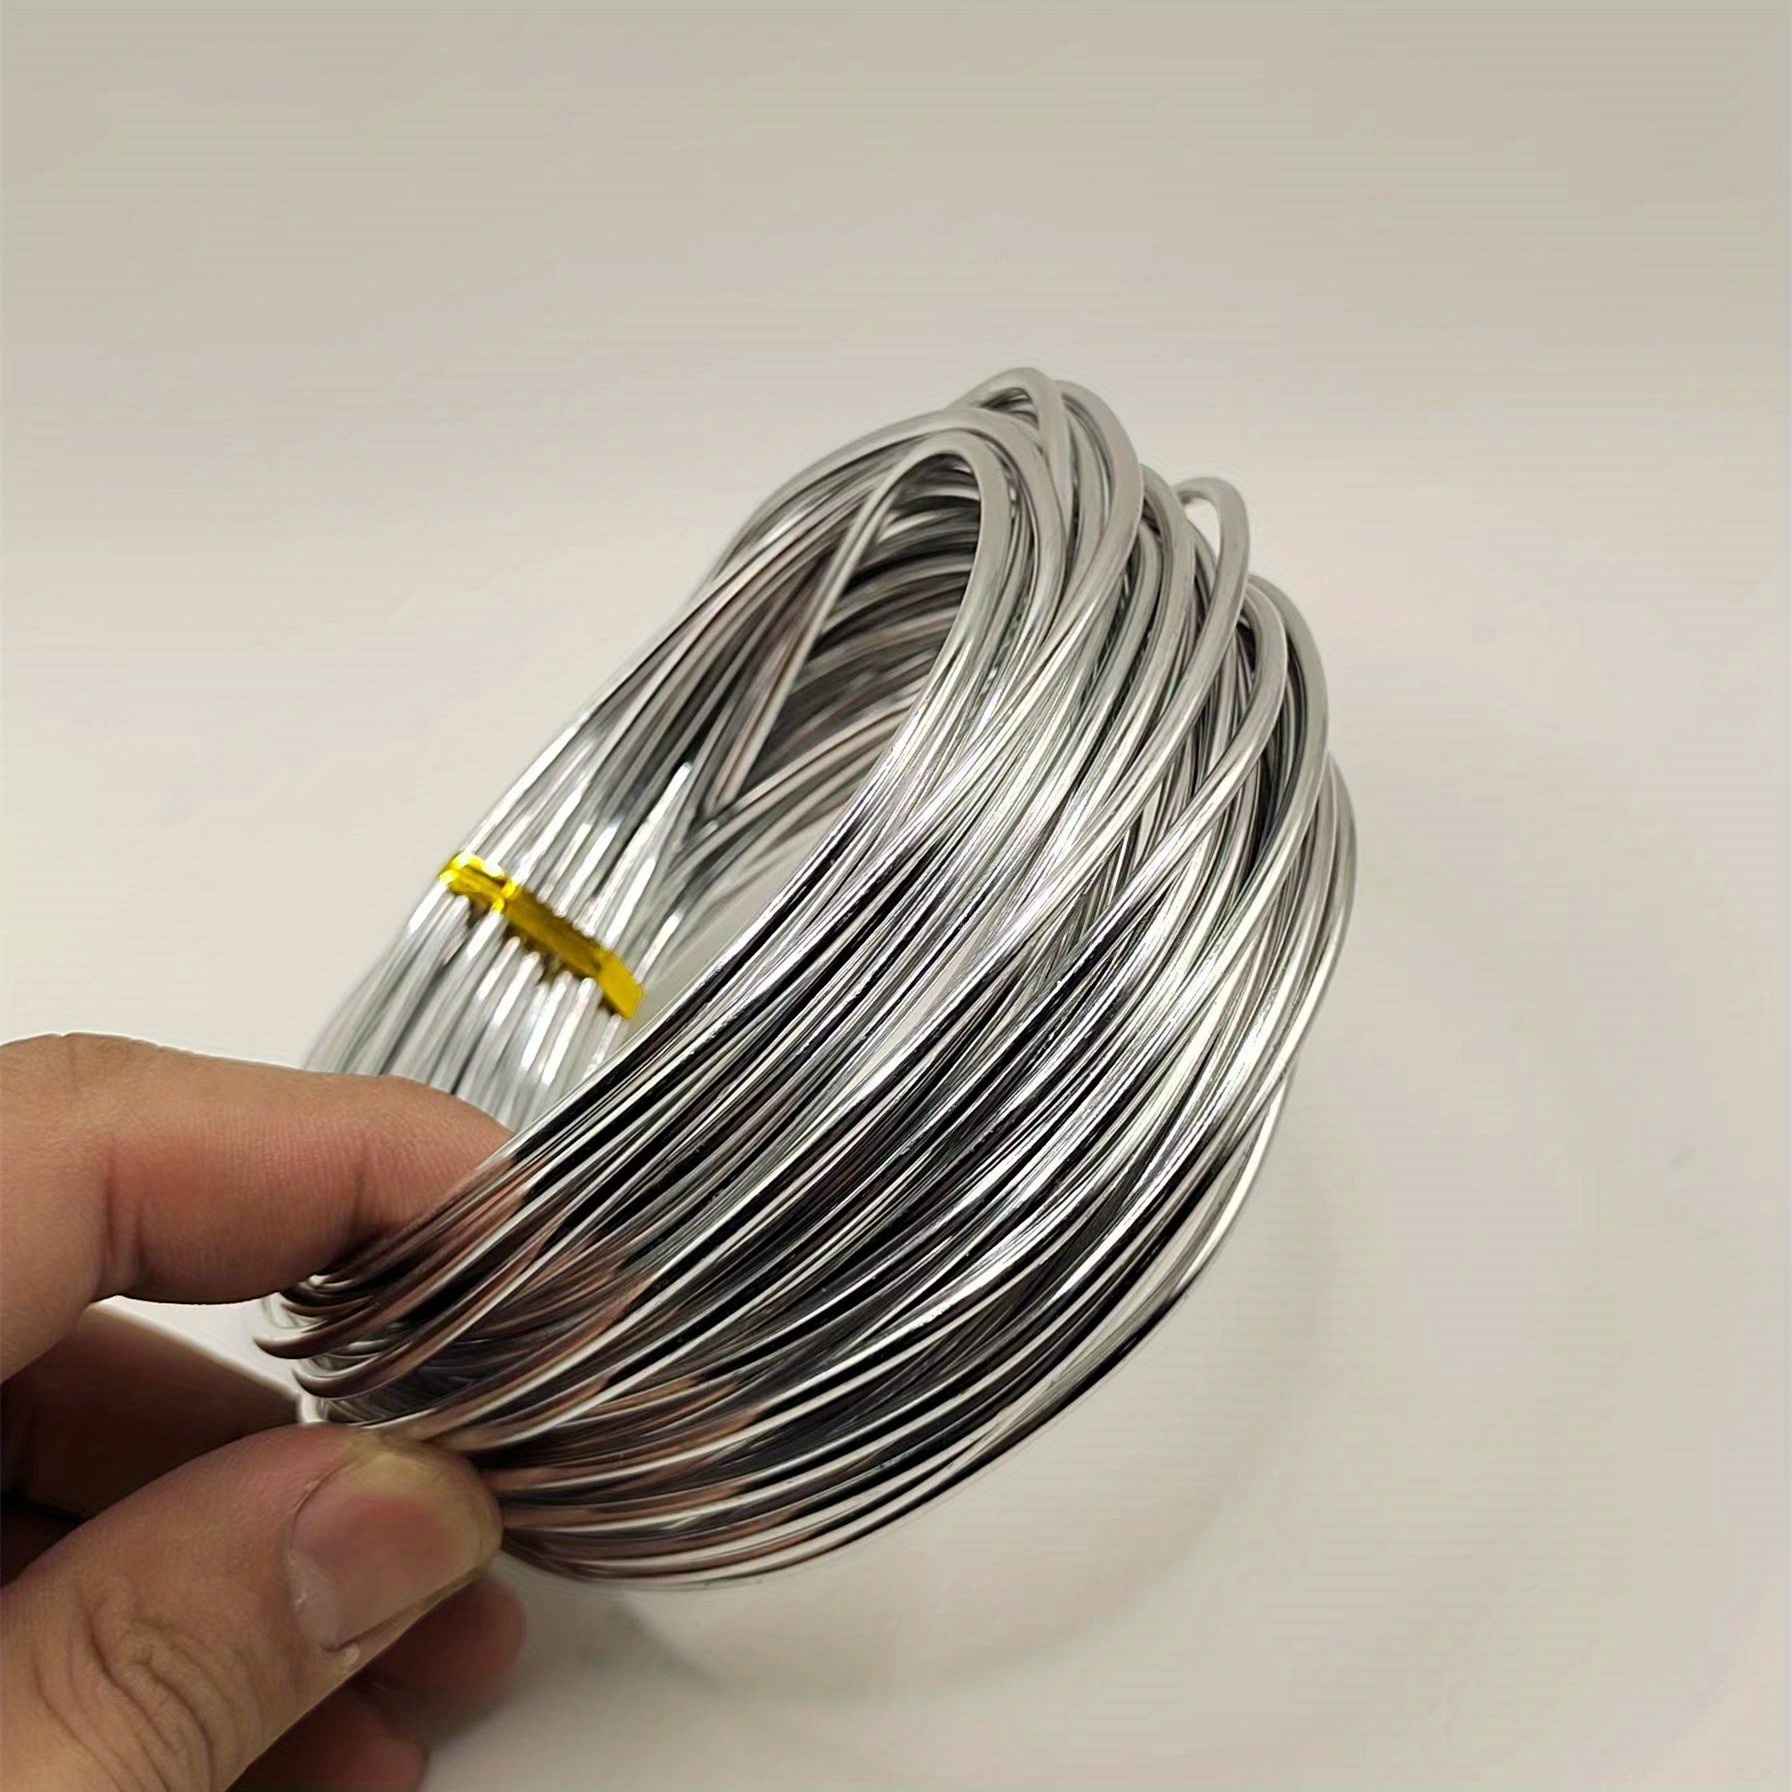 Mr. Pen- Aluminum Wire, 1.5 mm, 32.5 Feet, 1 Roll, Craft Wire, Metal Wire,  Armature Wire, Crafting Wire, Bendable Wire, Wire for Crafts, Sculpting  Wire, Doll Ar…